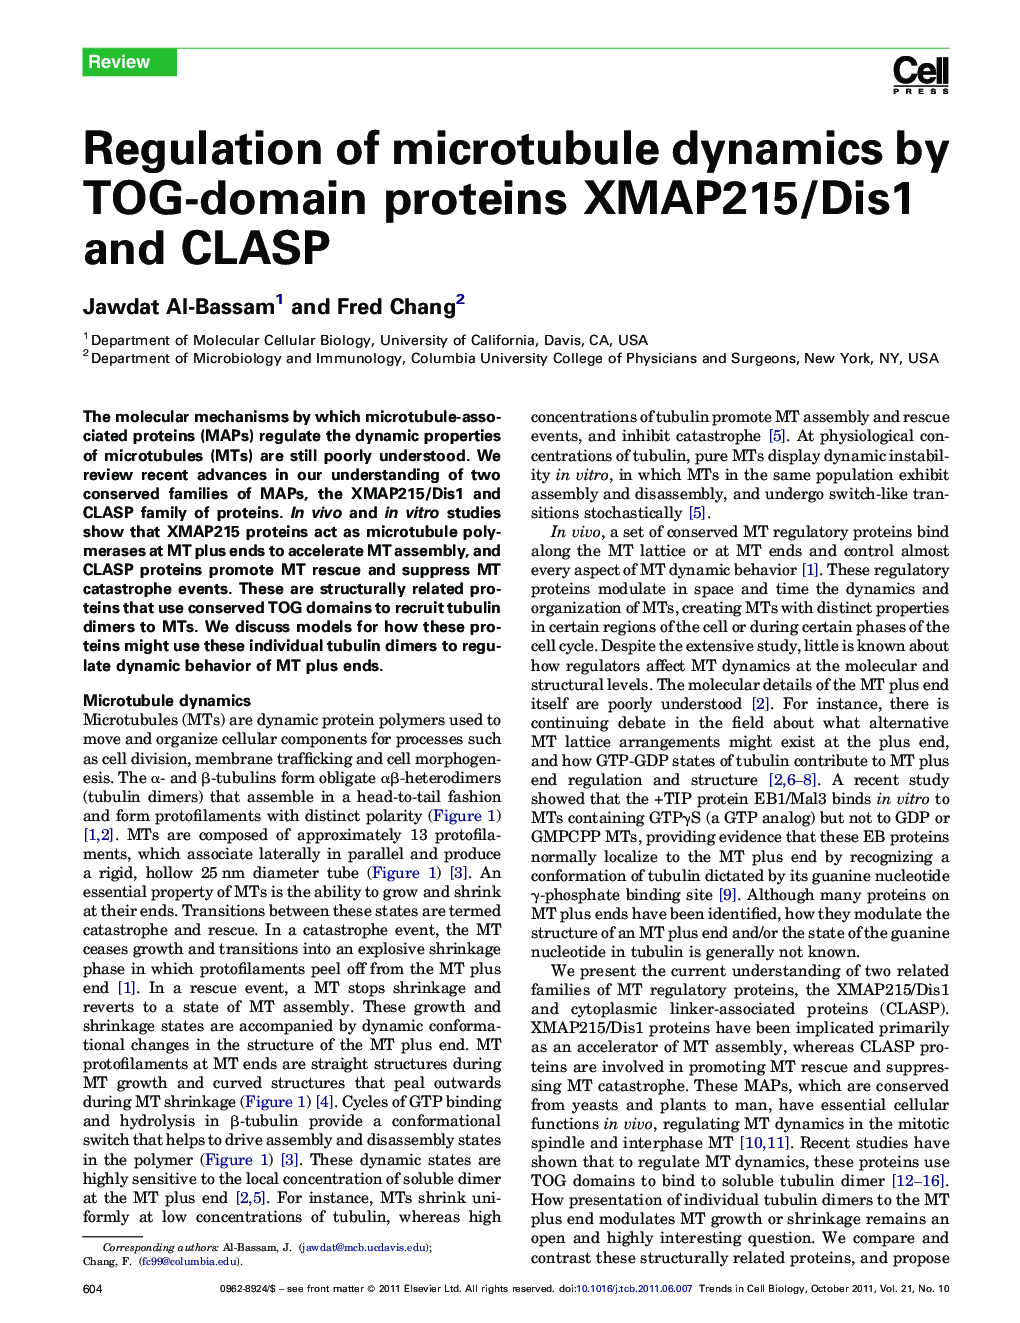 Regulation of microtubule dynamics by TOG-domain proteins XMAP215/Dis1 and CLASP